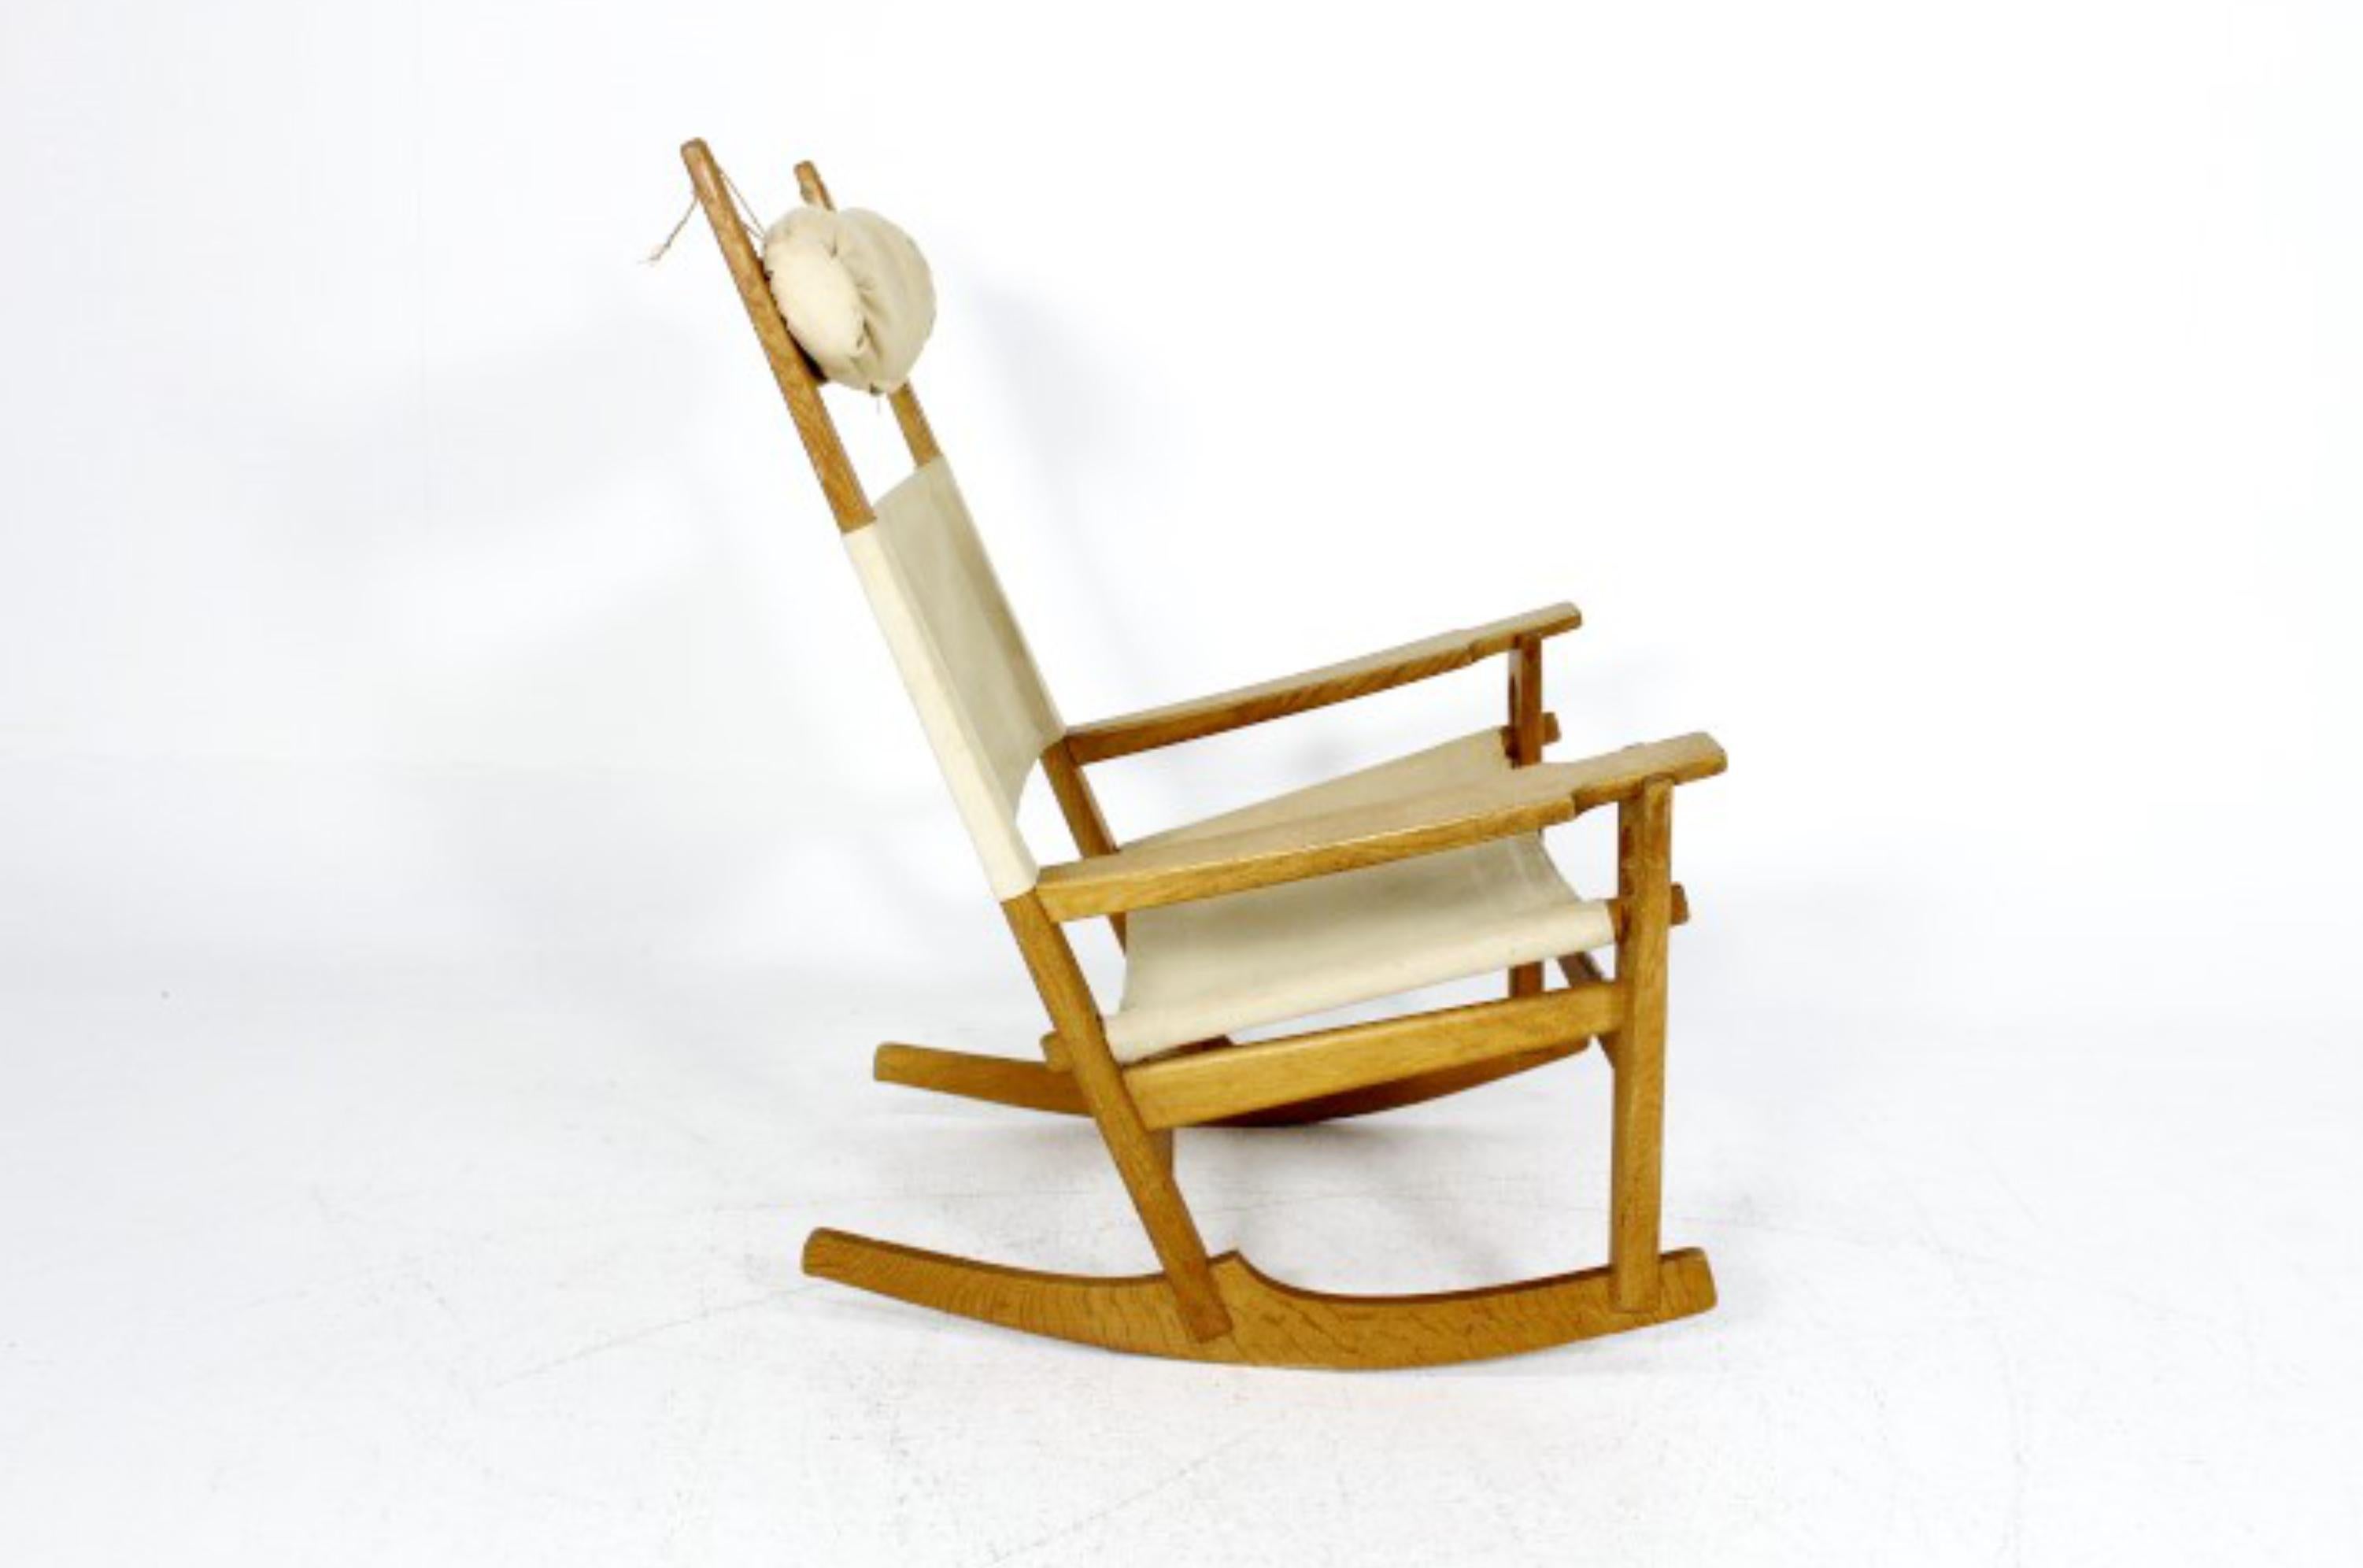 Keyhole rocking chair designed by Hans J. Wegner for GETAMA in Denmark in the end of Fifties. Frame made in natural oakwood and linen.